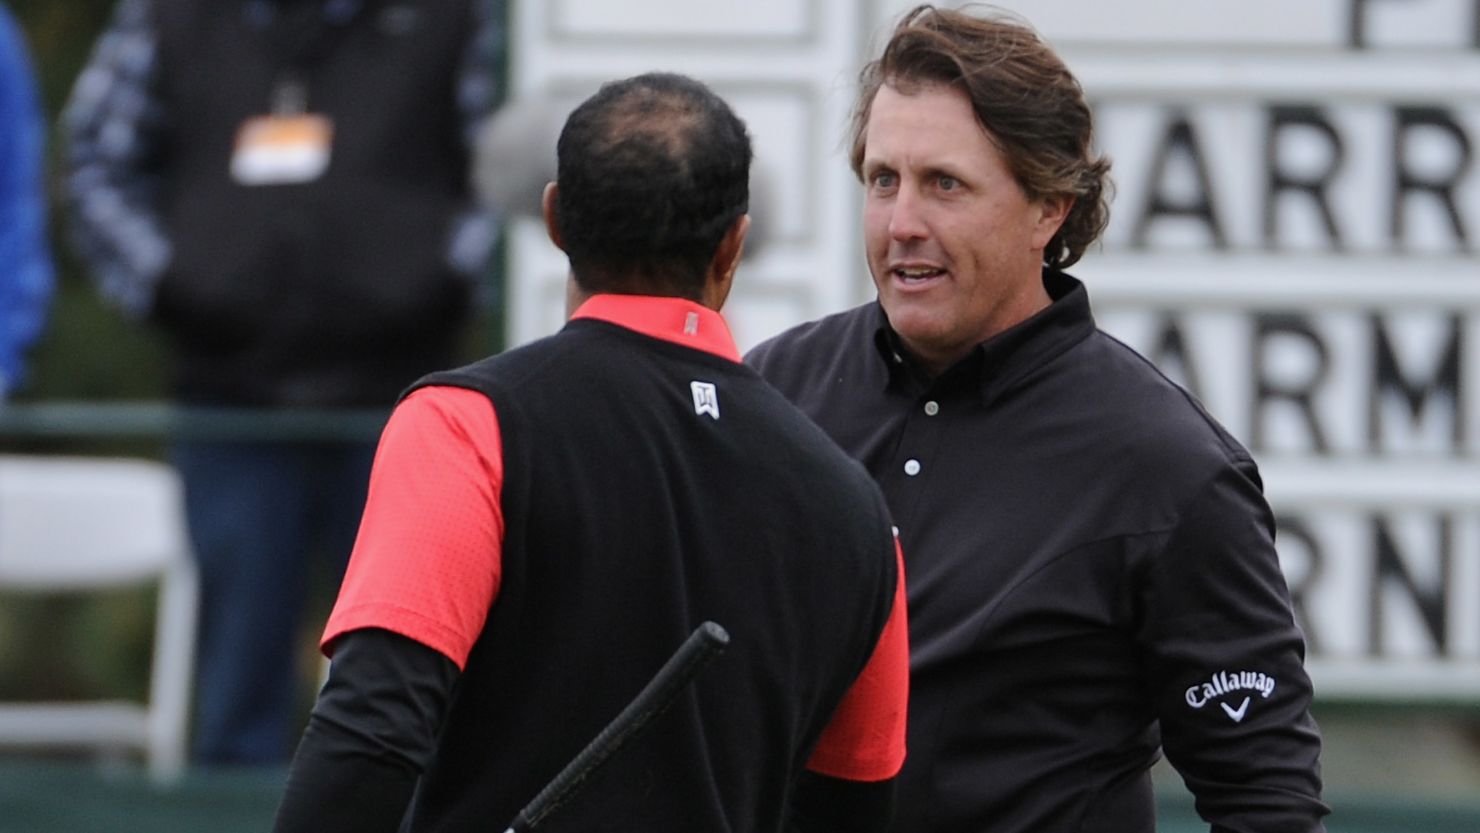 American duo Phil Mickelson and Tiger Woods have won a total of 18 majors between them.